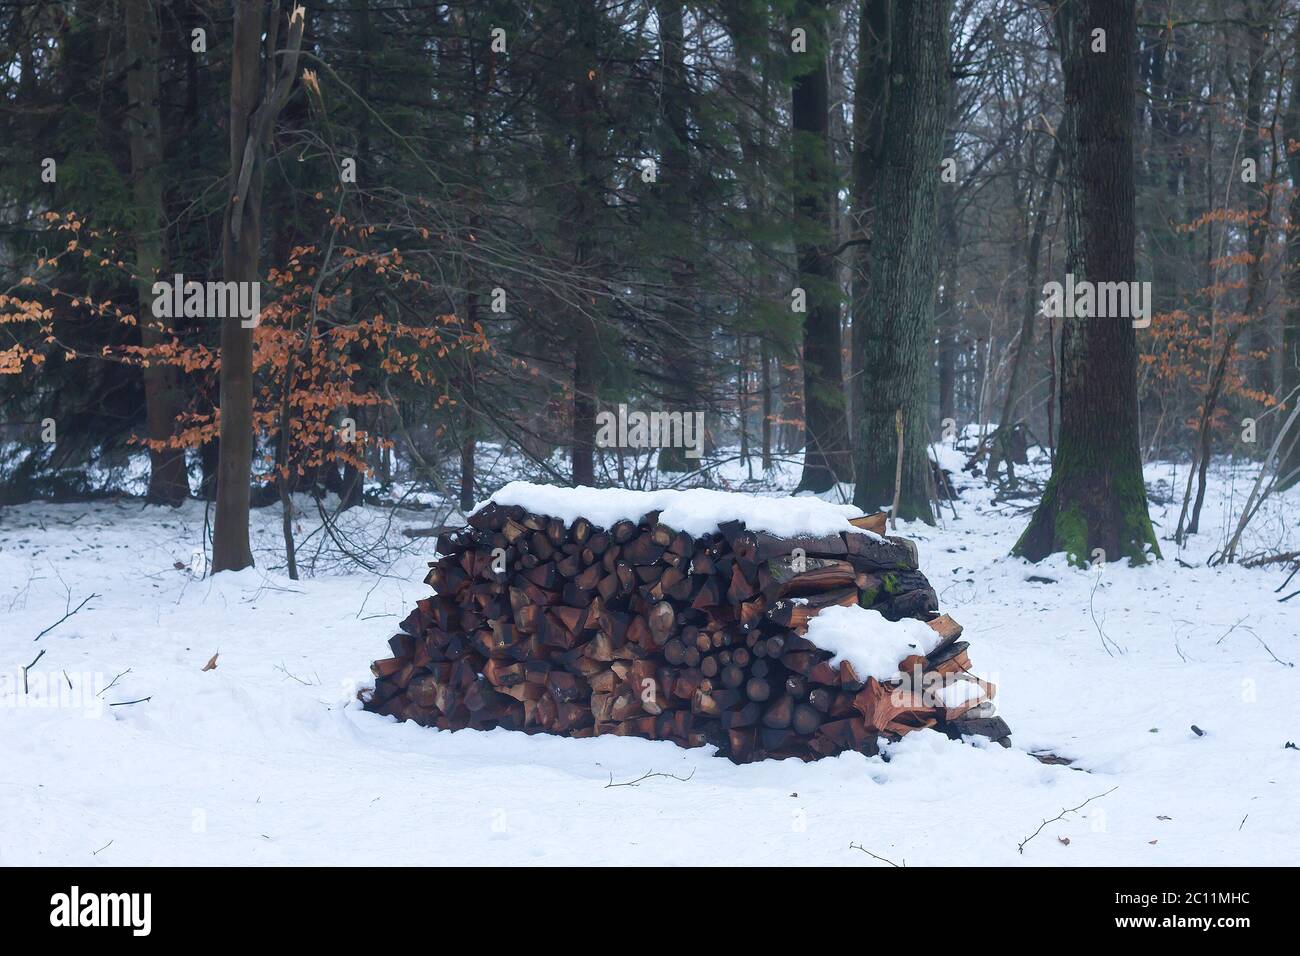 Pile of wooden logs in a snowy forest Stock Photo